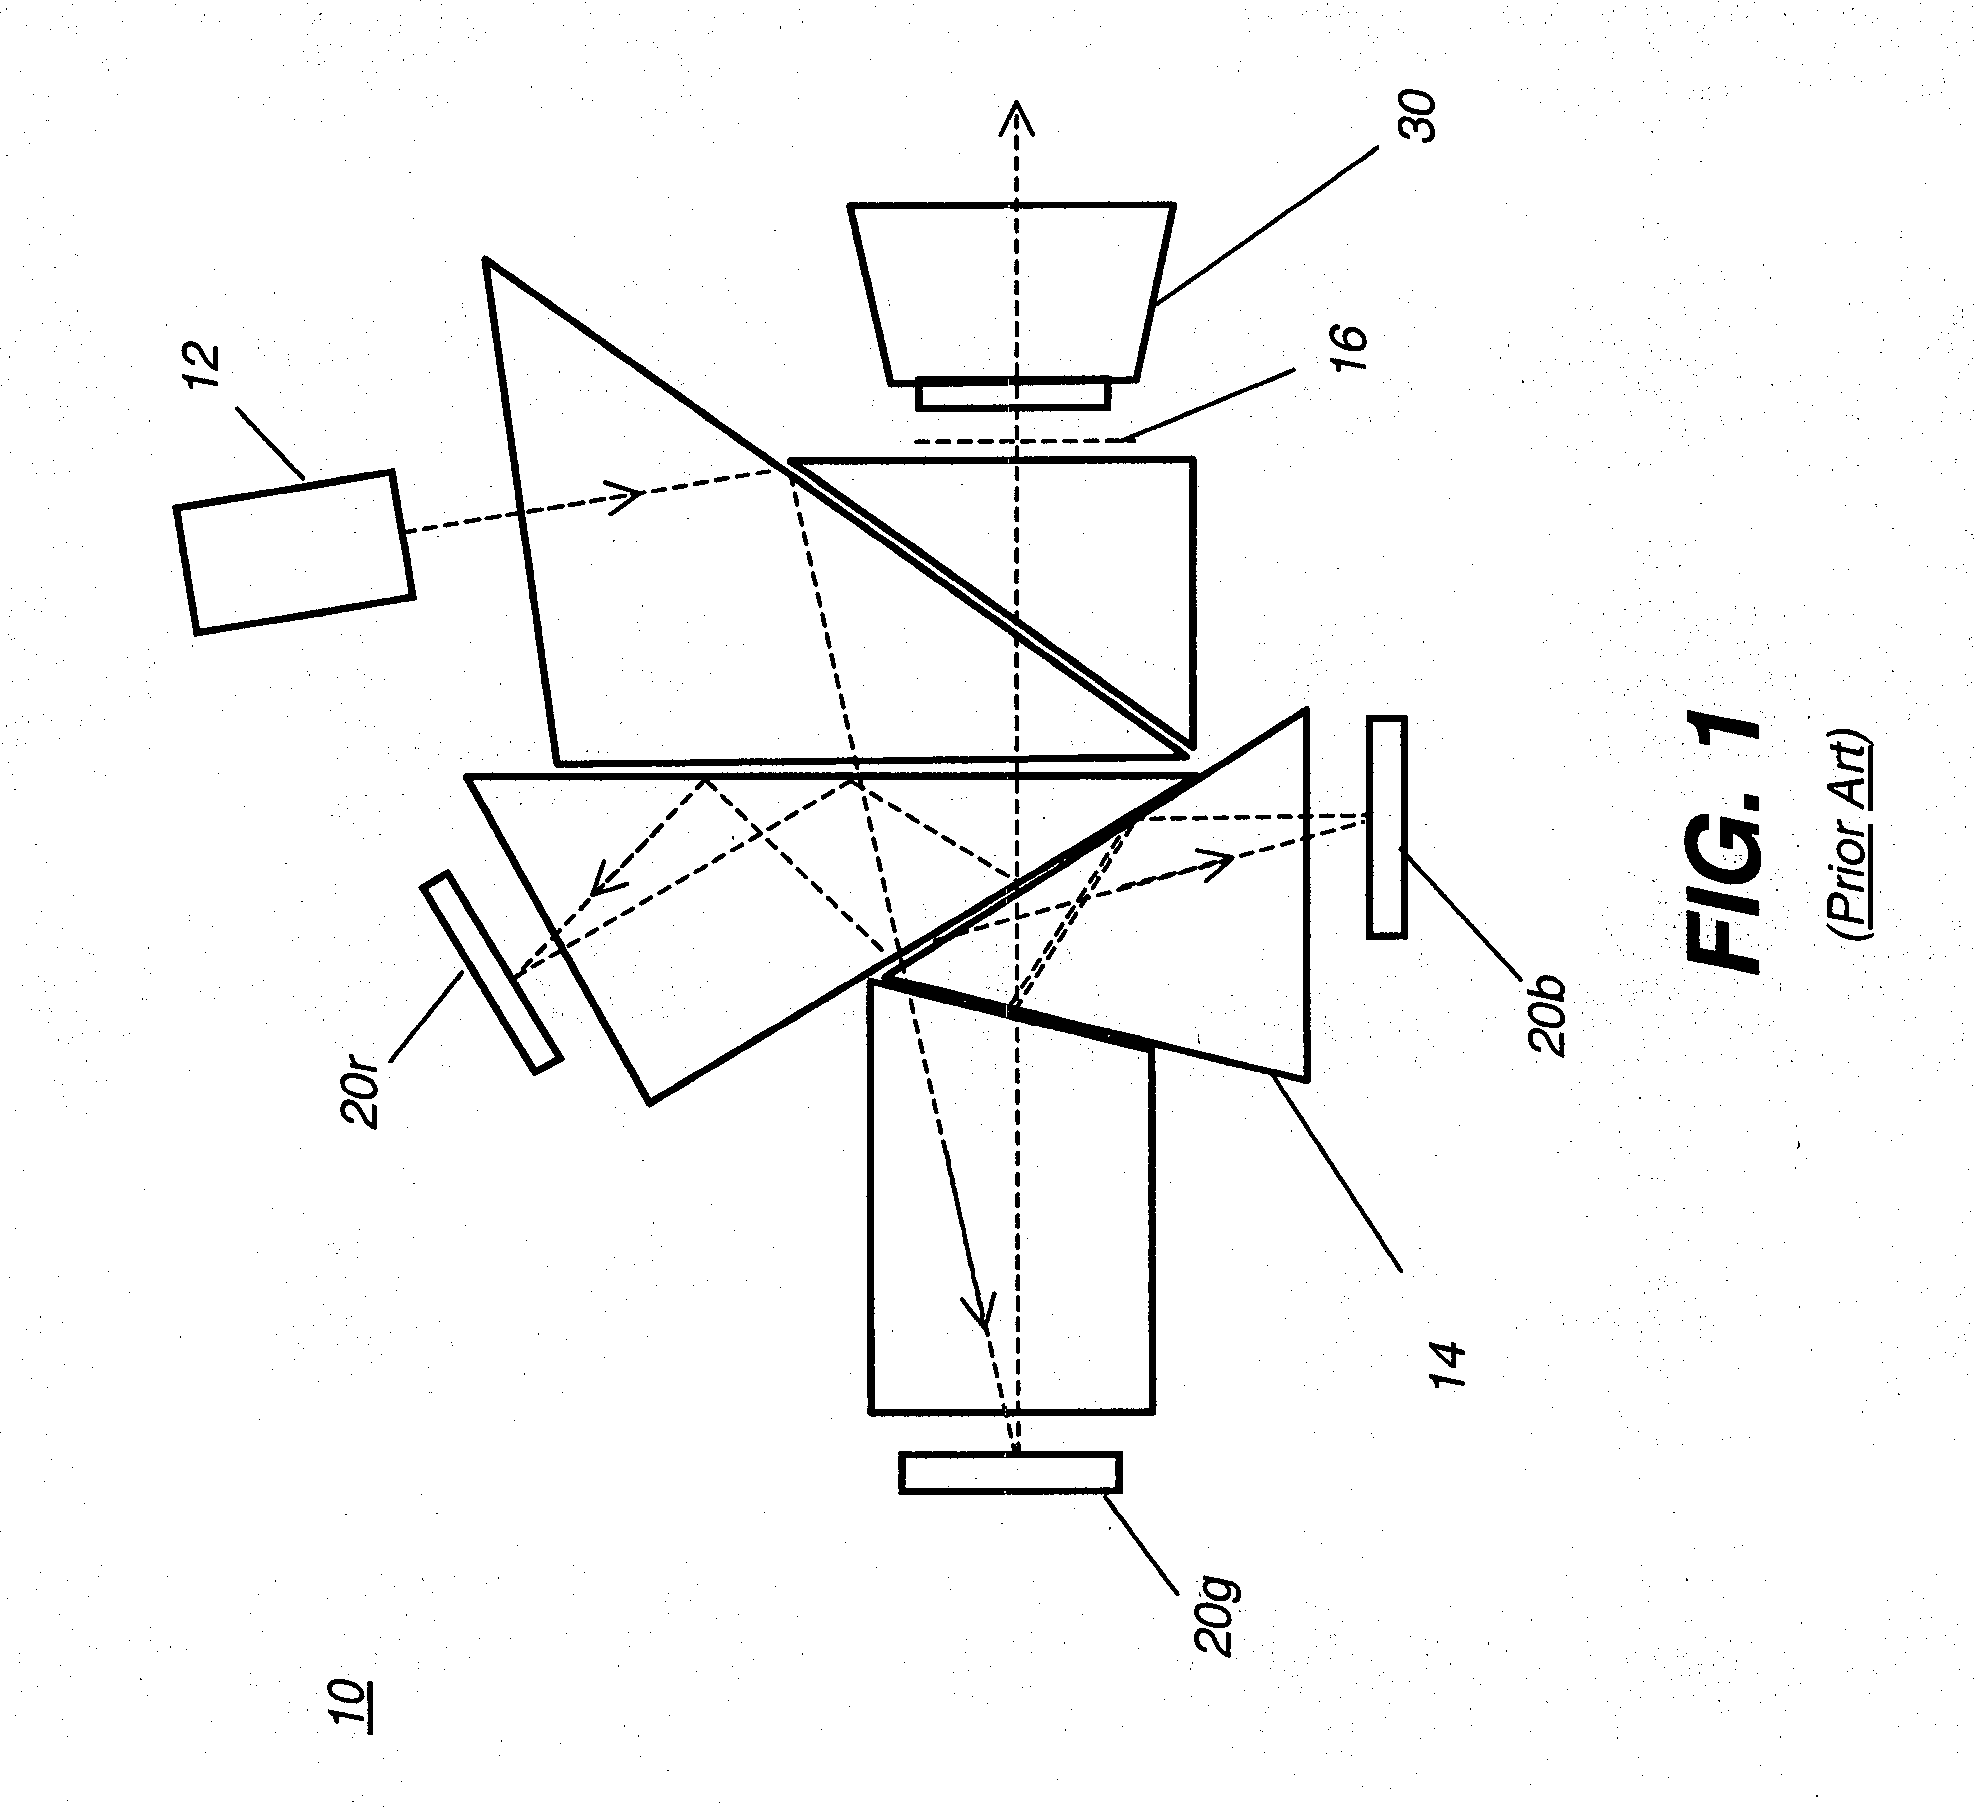 Stereo projection apparatus using polarized solid state light sources